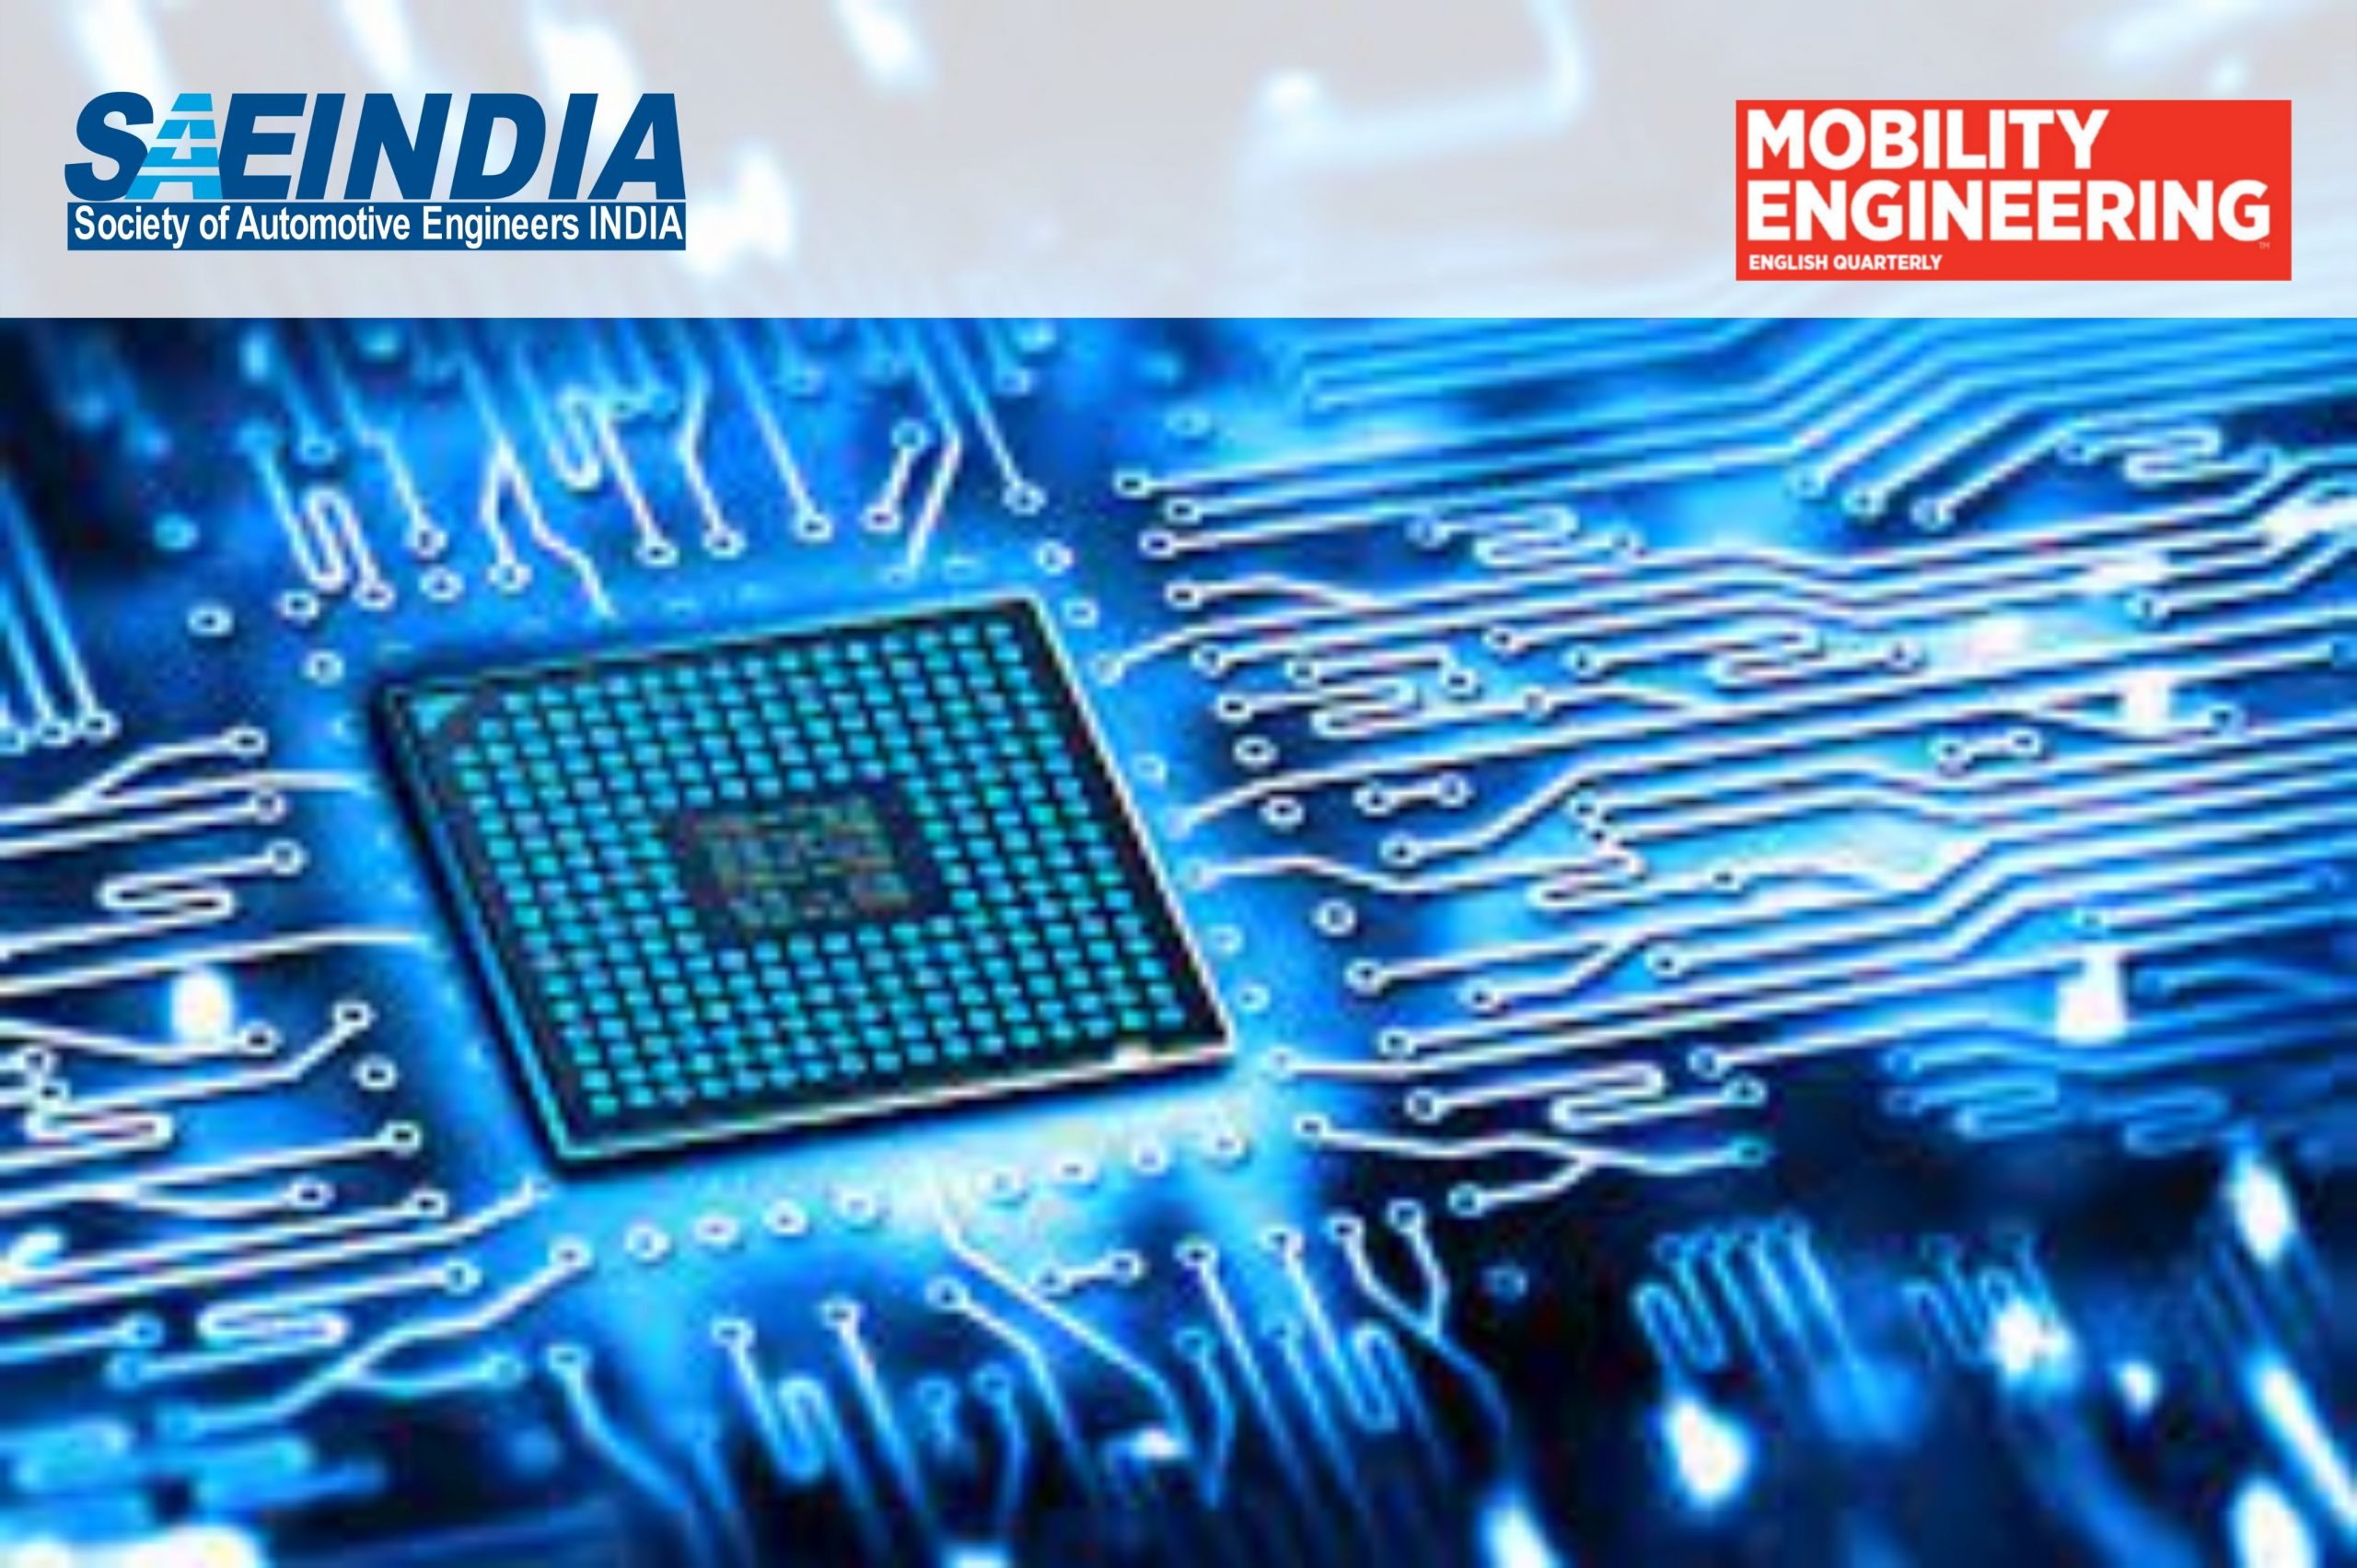 Trends in Electrical and Electronics Architecture - SAEINDIA